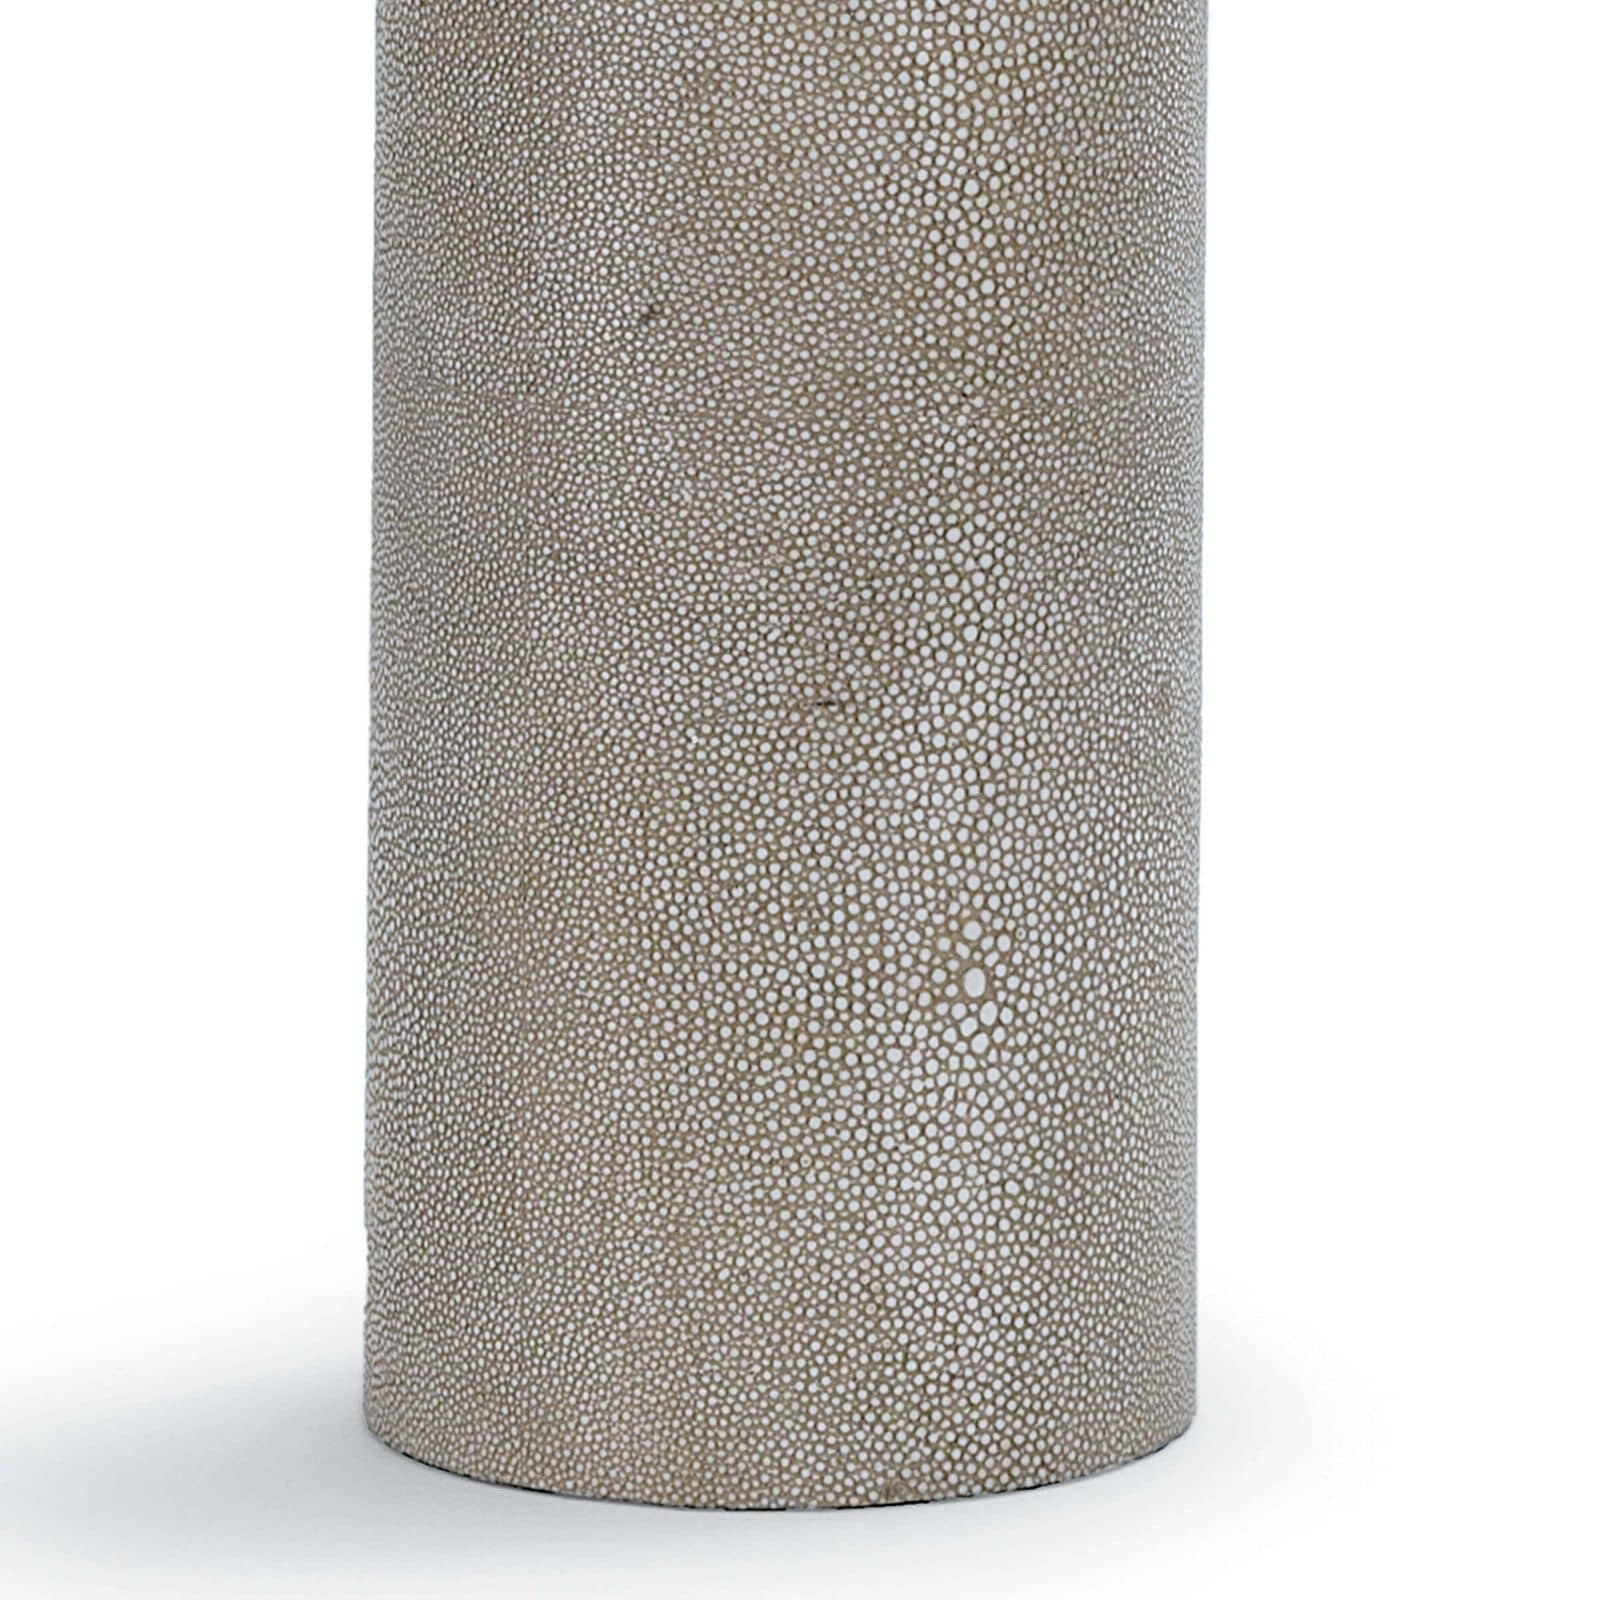 Boasting a fabric drum shade atop a column base with a faux shagreen facade, the Harlow Table Lamp radiates sophistication. We'd love to see this in your bedroom, living room, or other space.     Overall Dimensions: 15"w x 15"d x 27"h